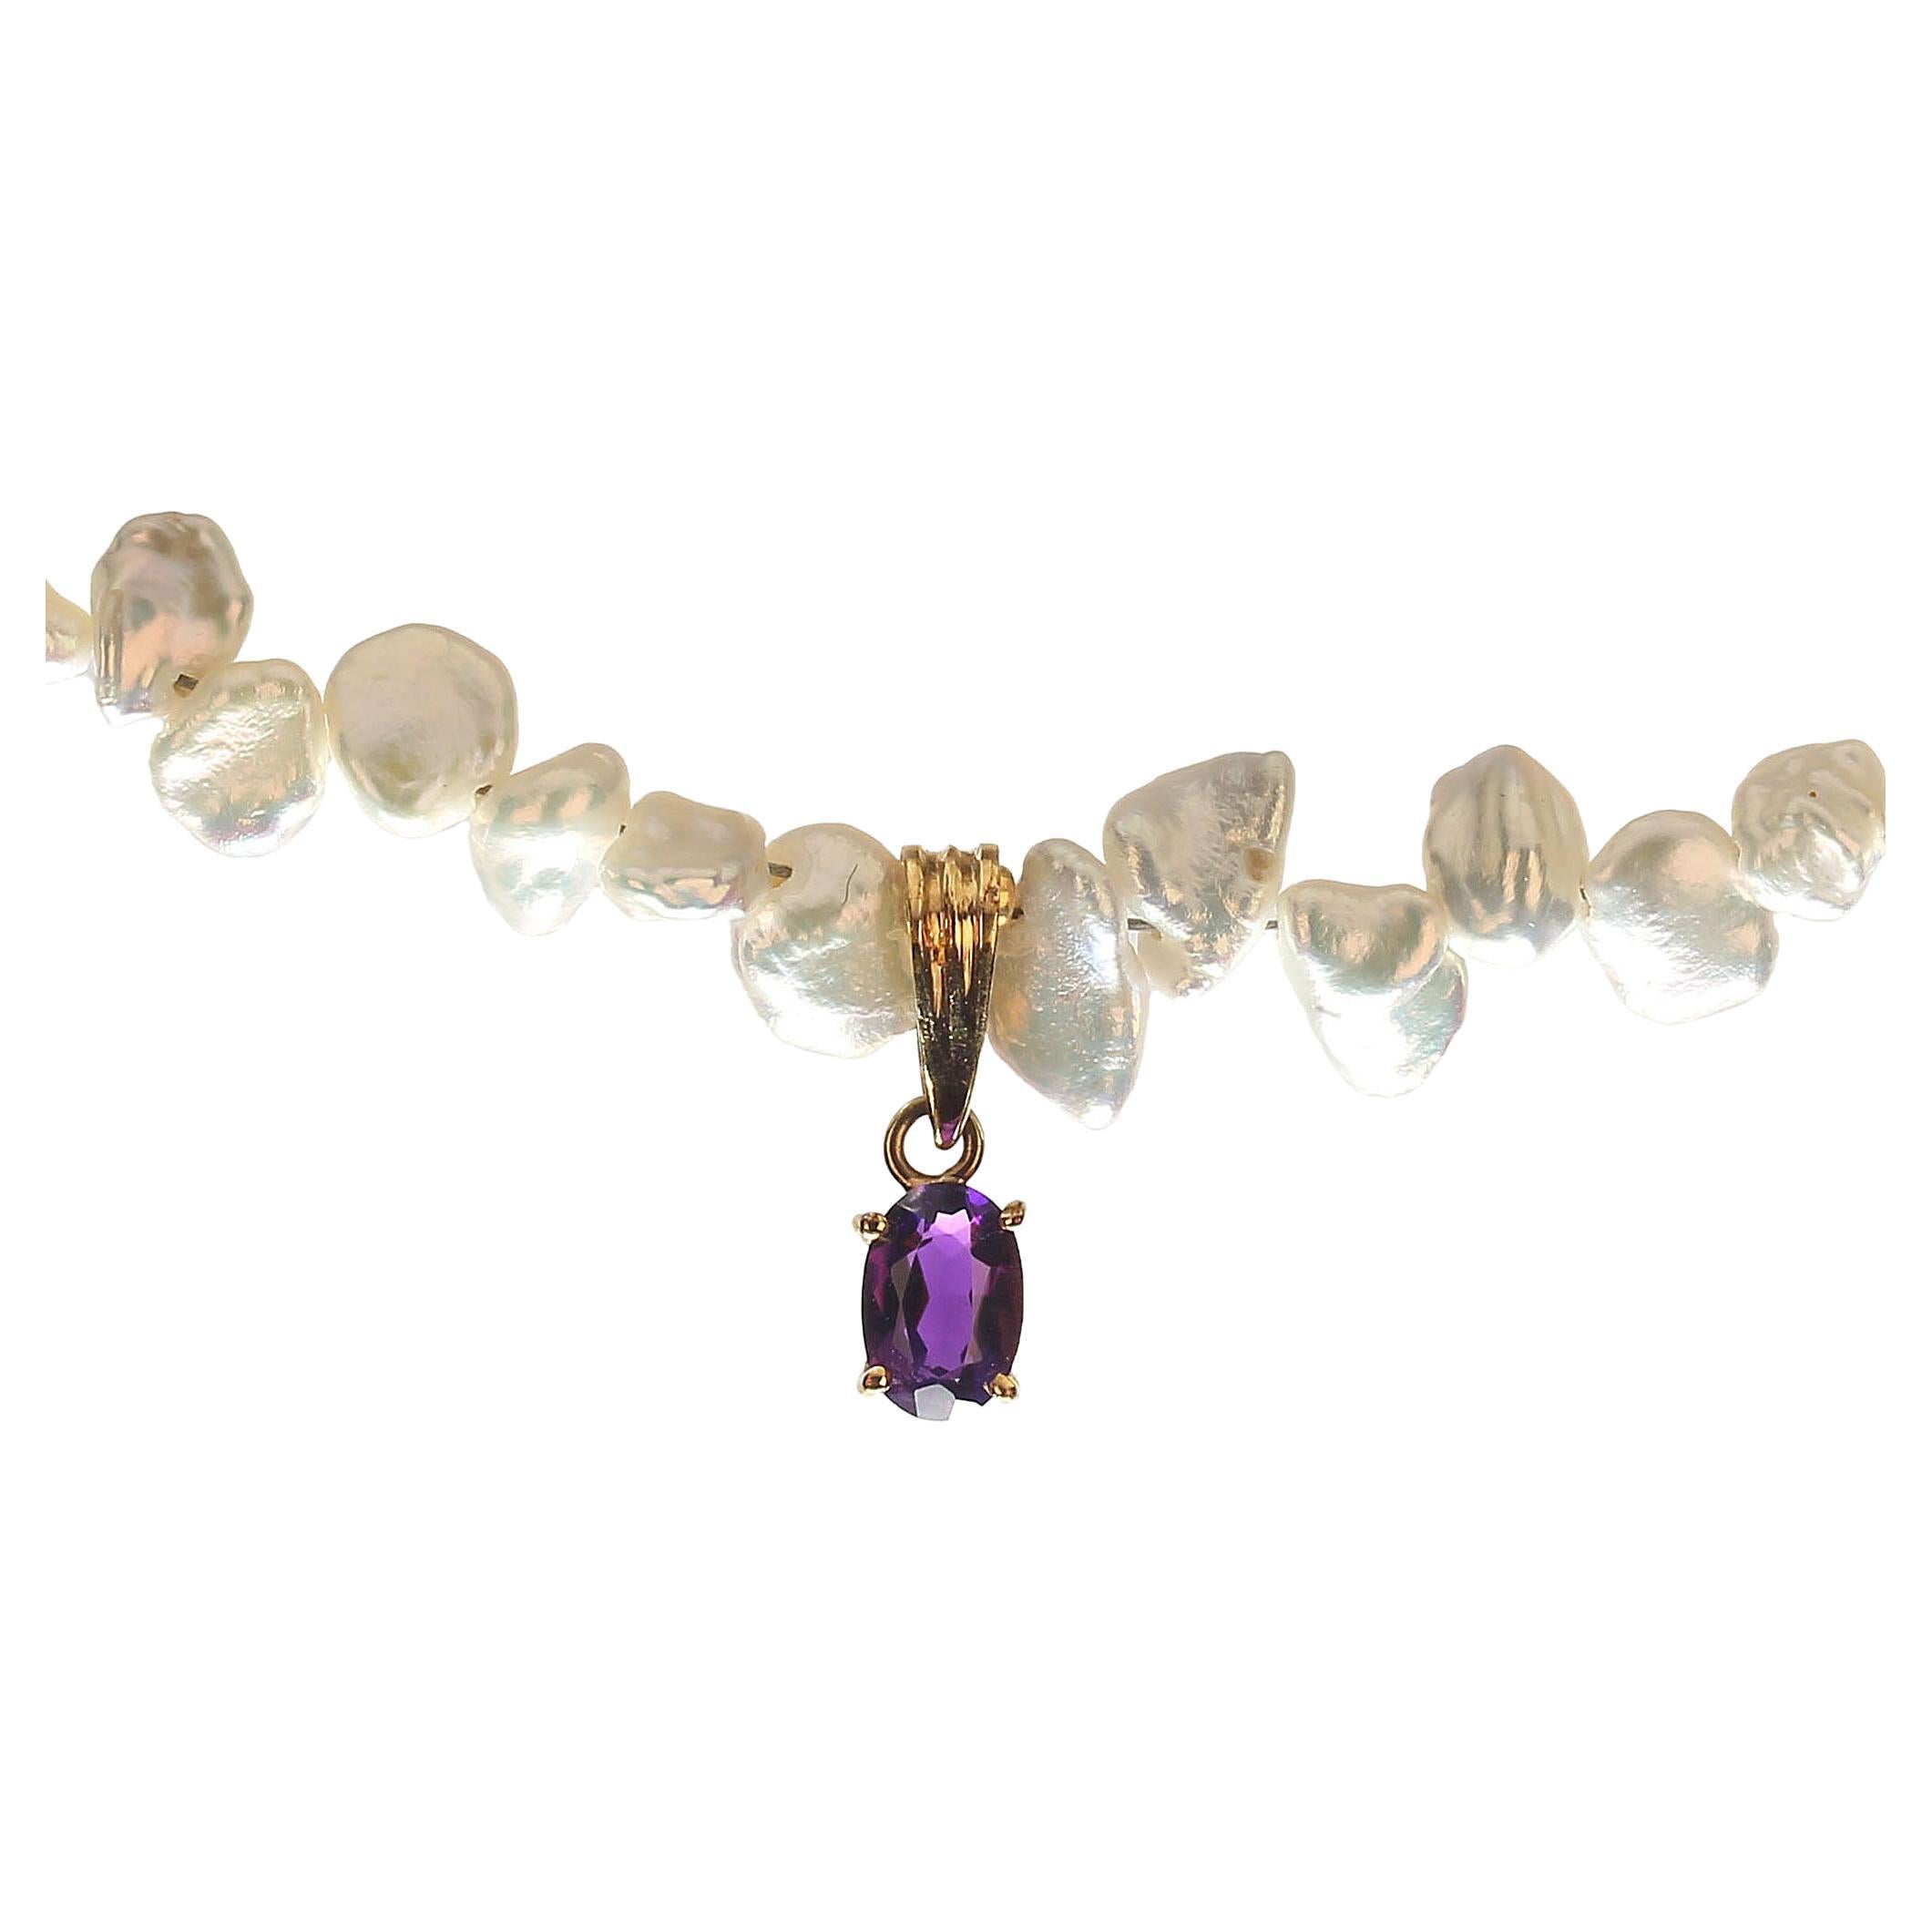 AJD Freshwater Pearl Necklace with Amethyst in 18K Yellow Gold